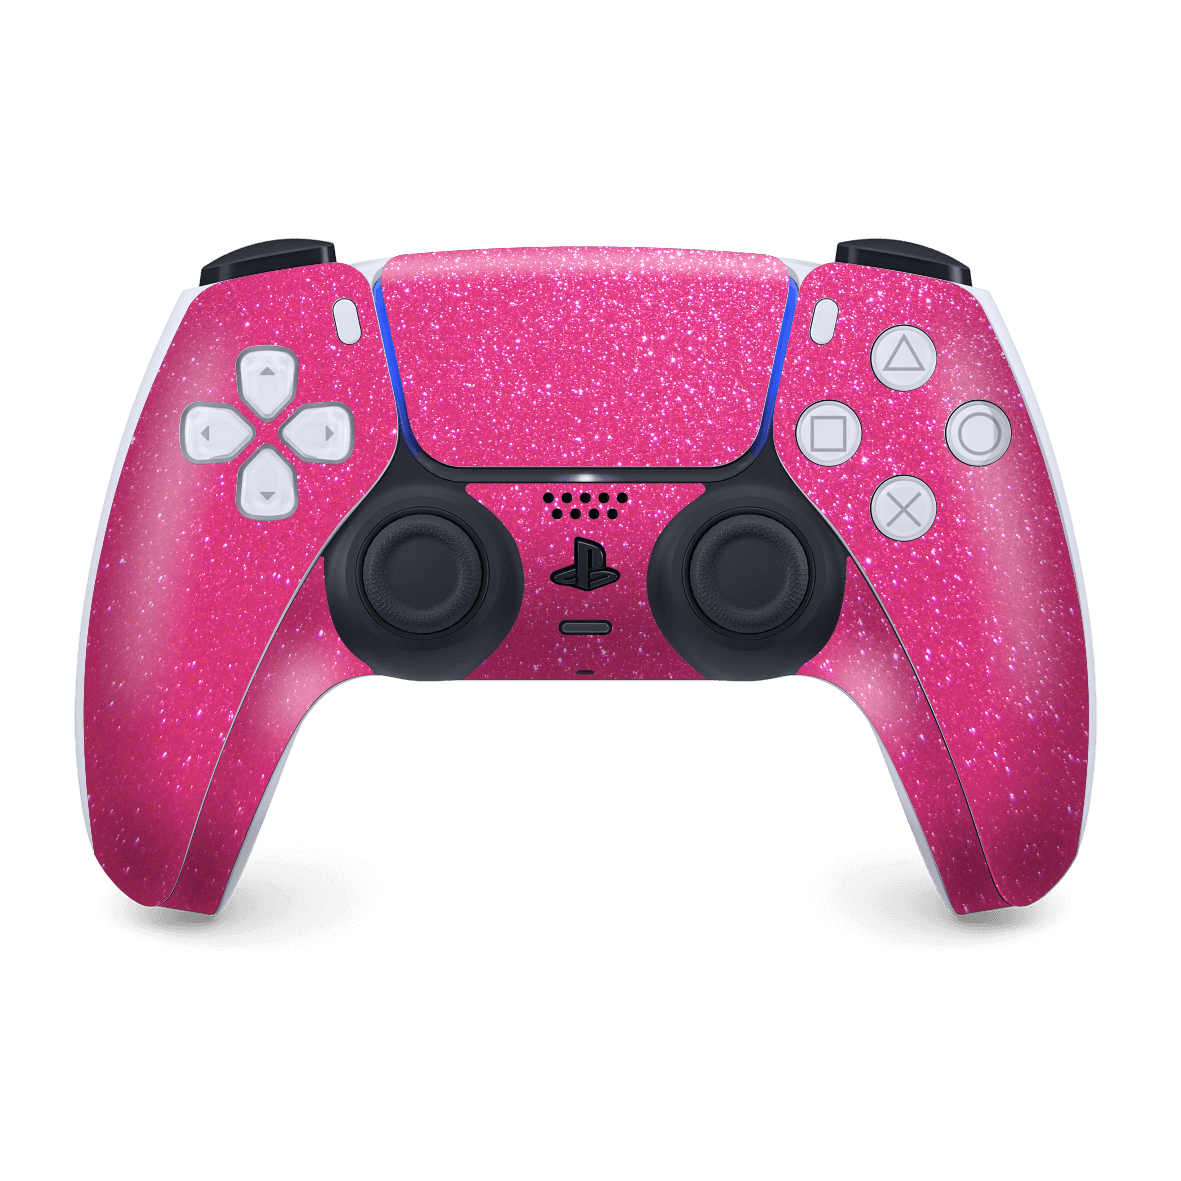 PS5 Playstation 5 DualSense Wireless Controller Skin - Diamond Candy Magenta Shimmering Sparkling Glitter Skin Wrap Decal Cover Protector by EasySkinz | EasySkinz.com